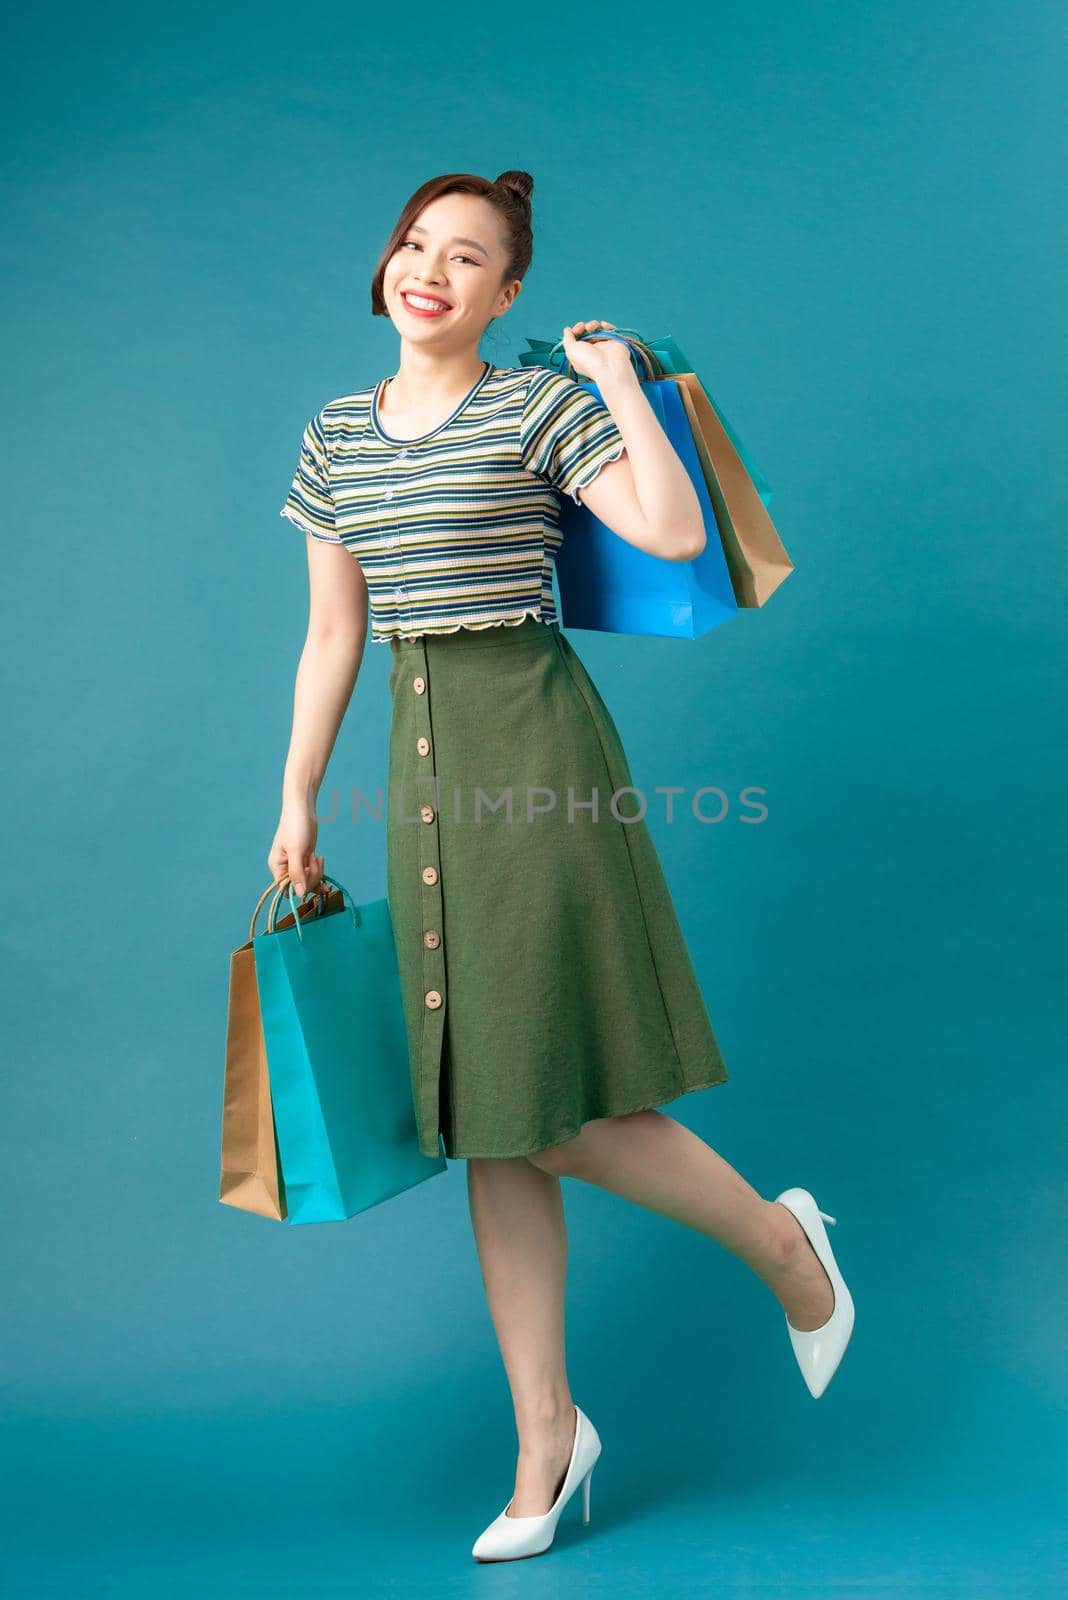 Woman wearing casual sweater on background happy enjoying shopping holding colorful bags